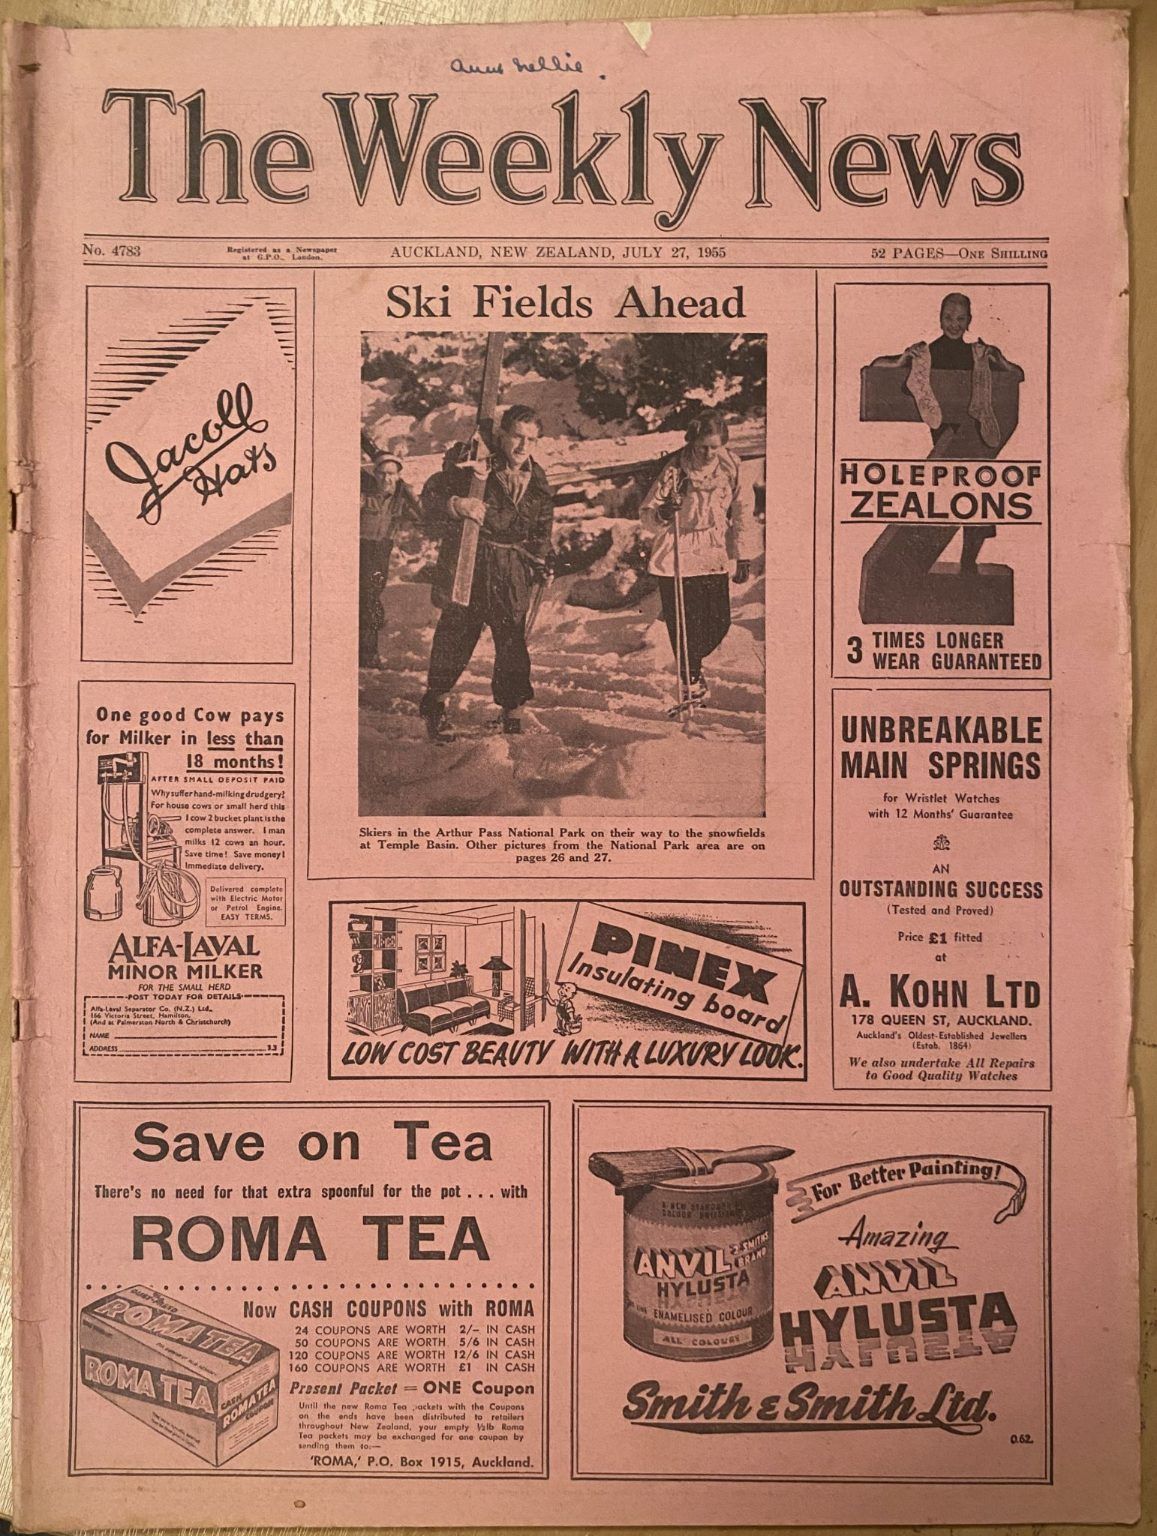 OLD NEWSPAPER: The Weekly News - No. 4783, 27 July 1955